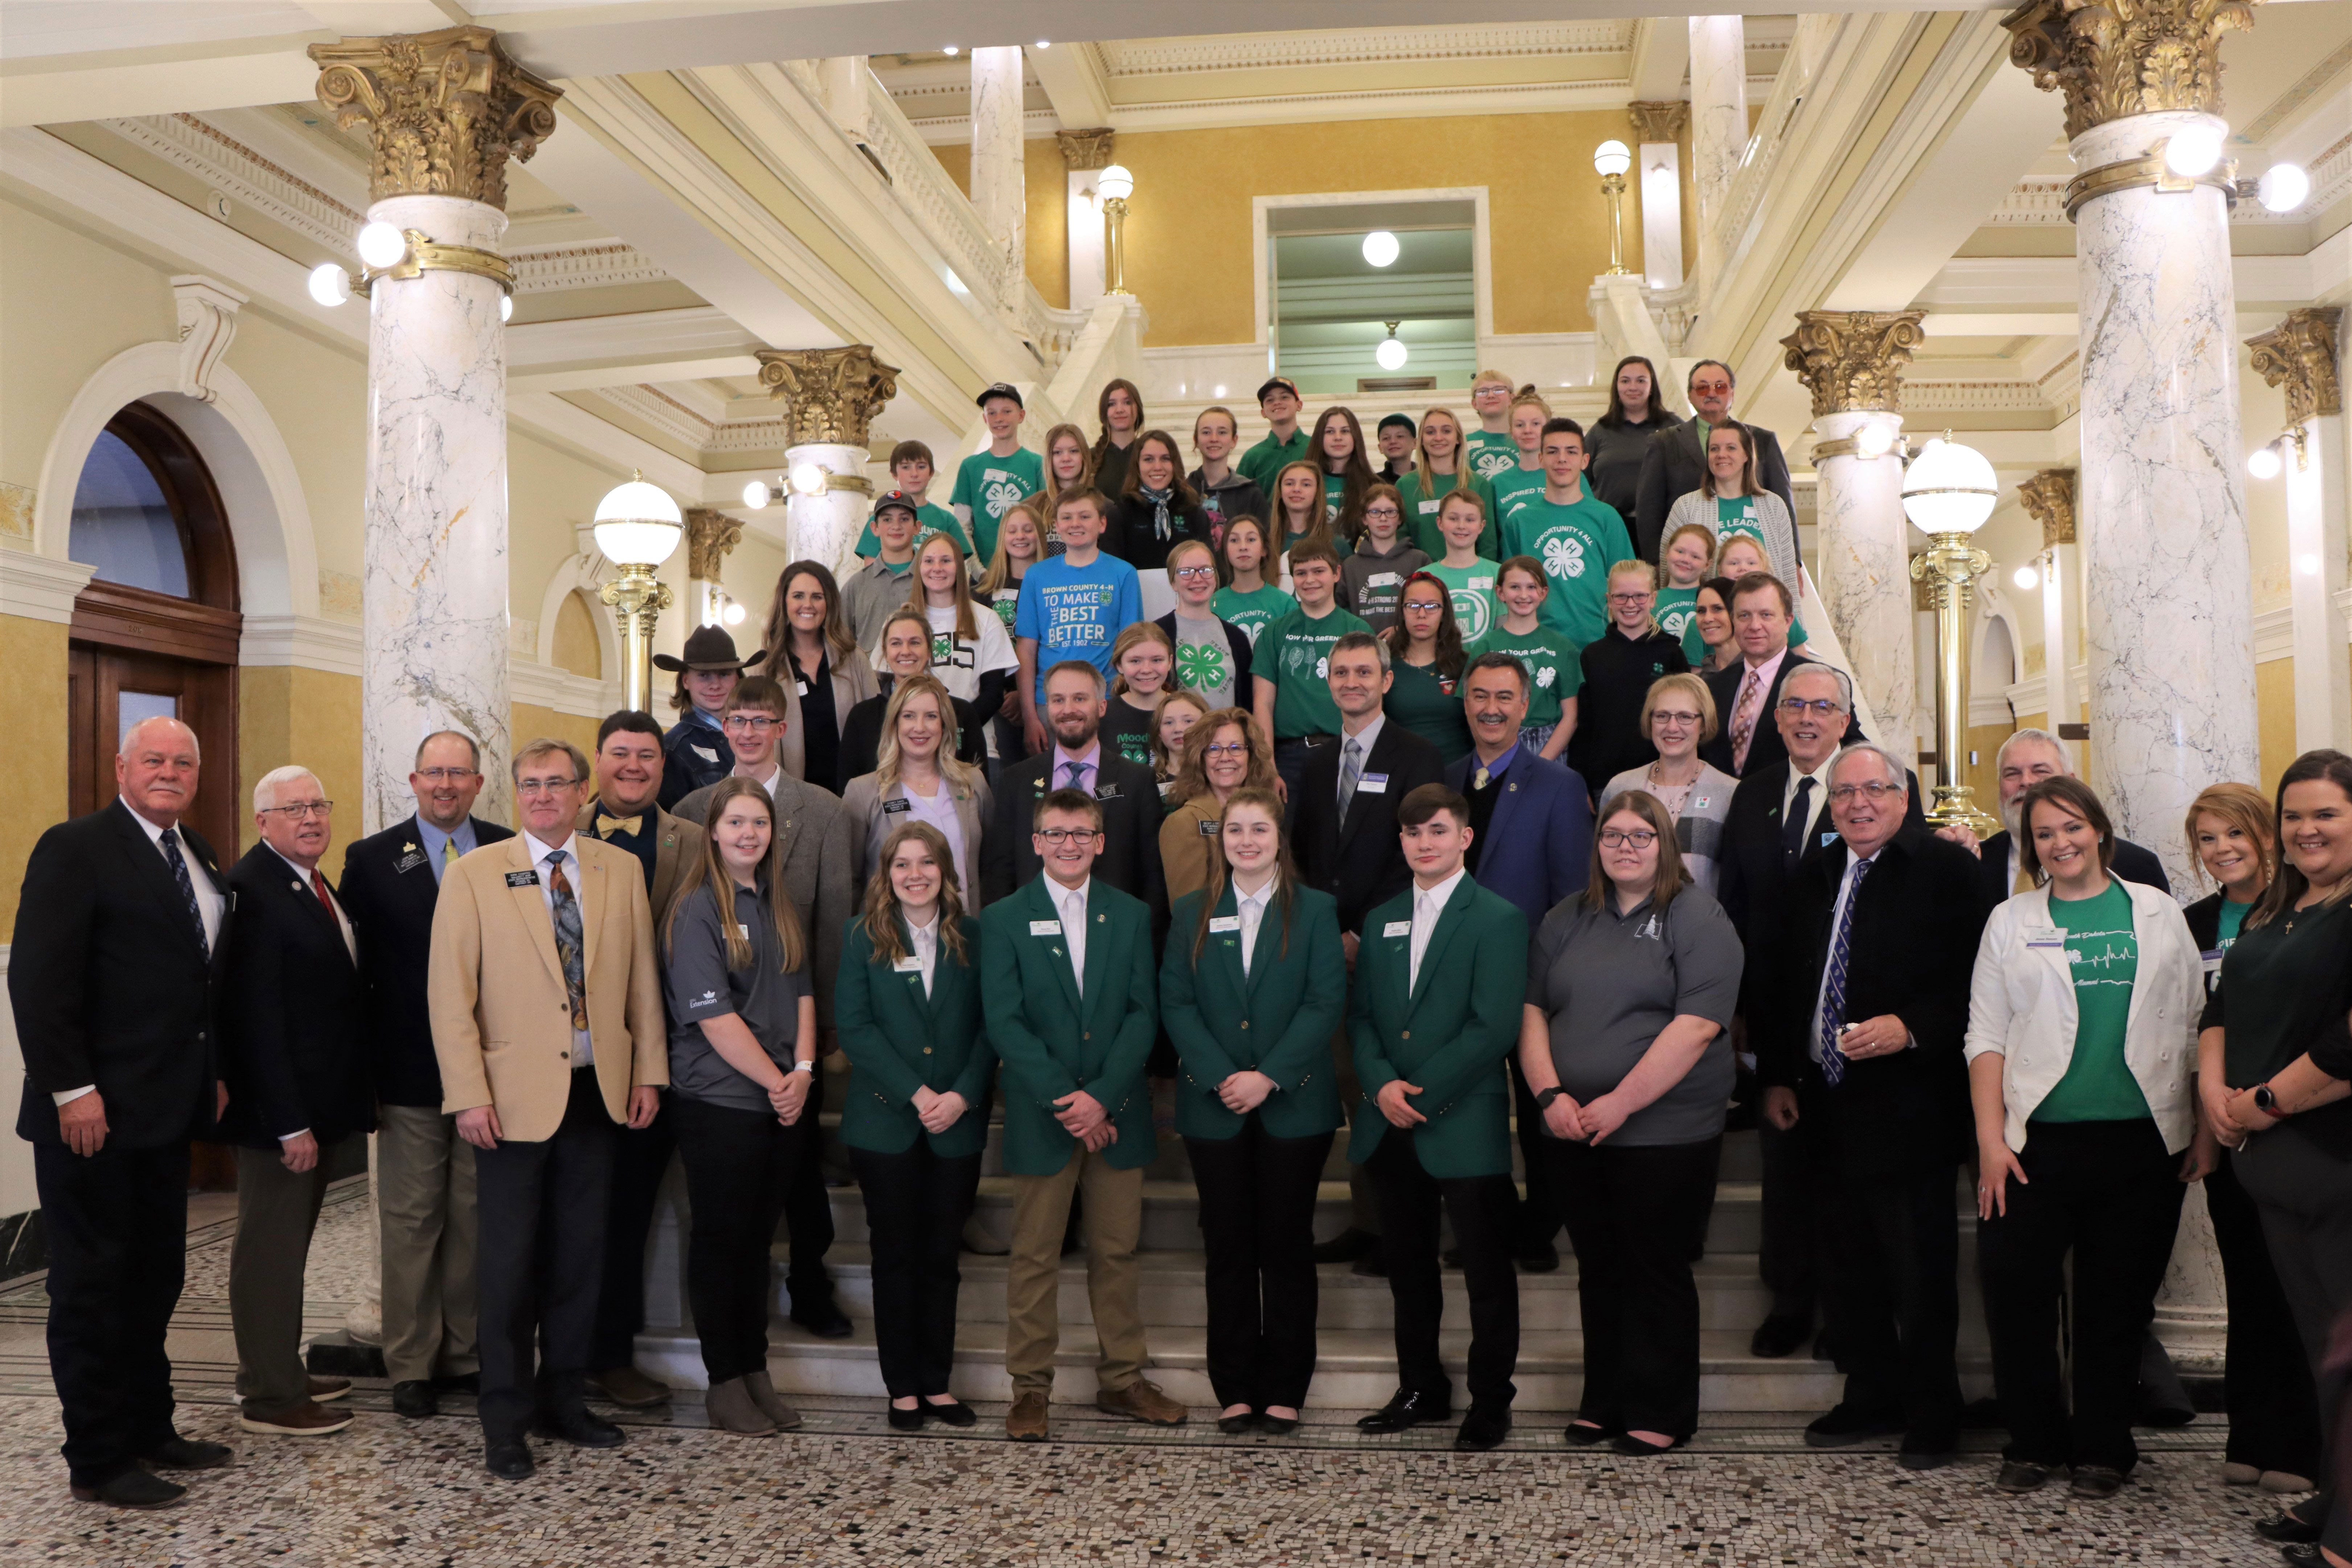 4-H Capitol Day participants stand at the S.D. Capitol building steps with S.D. Senators and Representatives and university personnel.